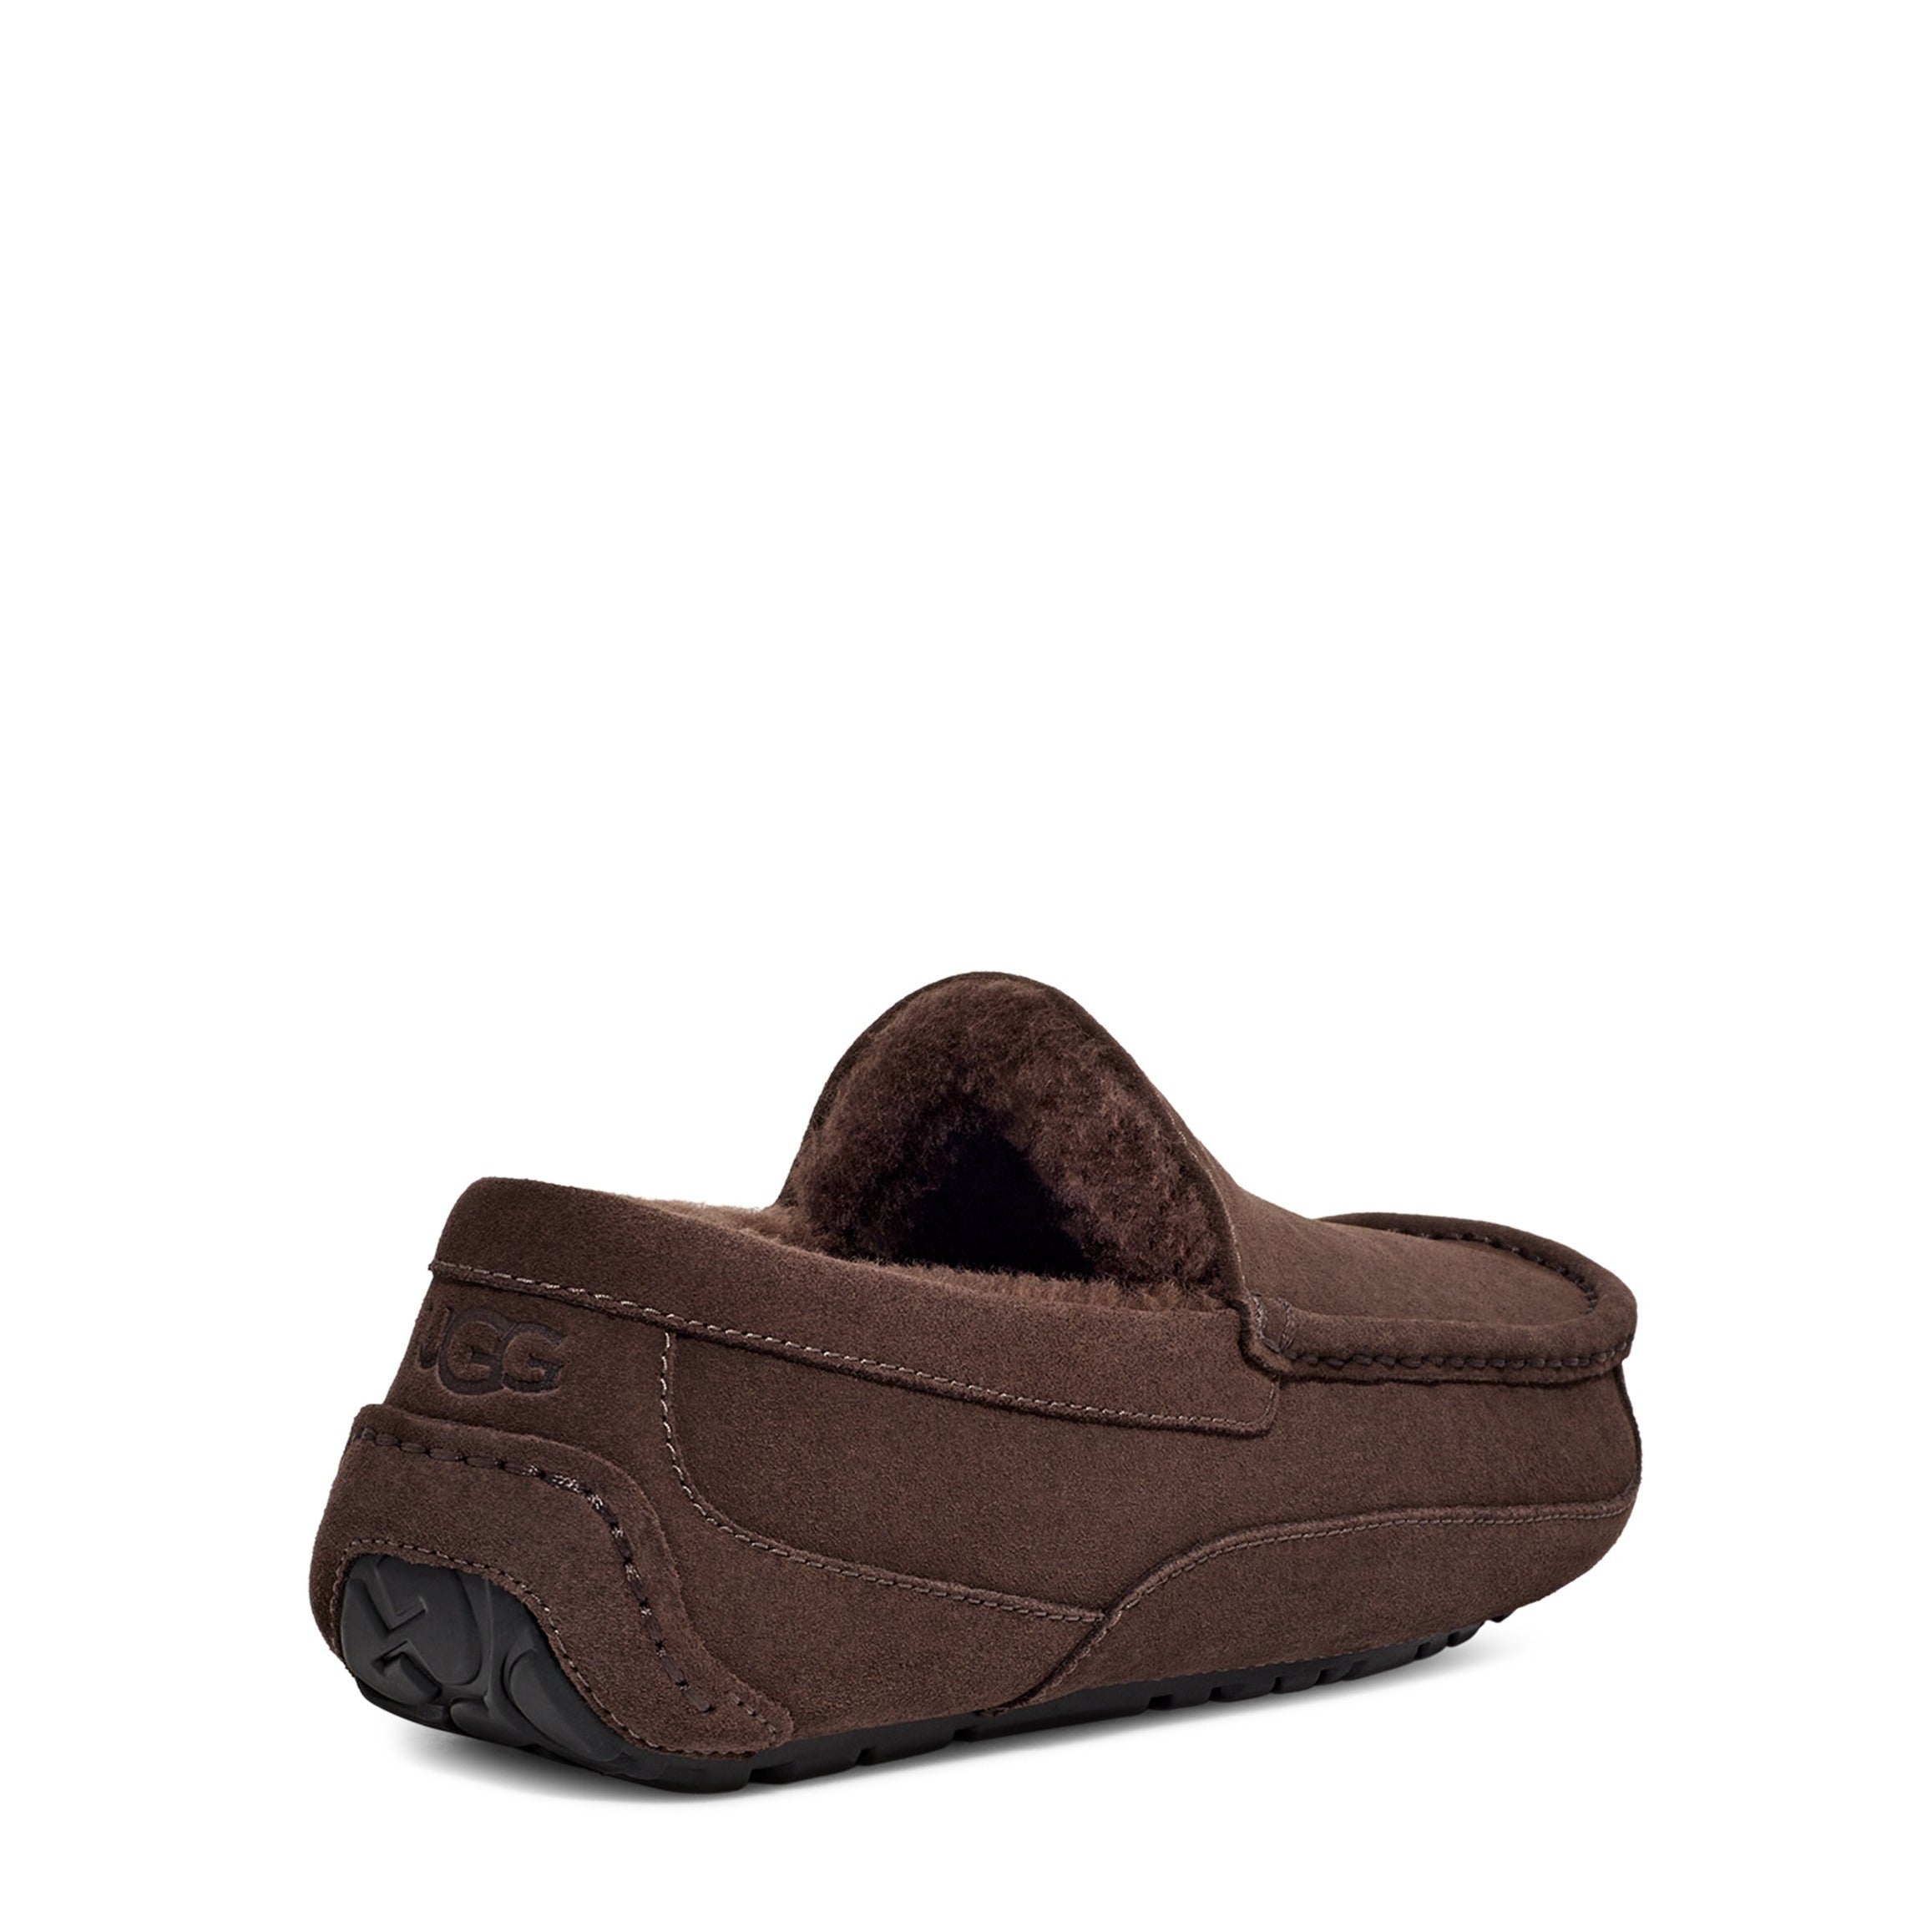 Sample UGG Ascot Loafers &amp; Laceups   